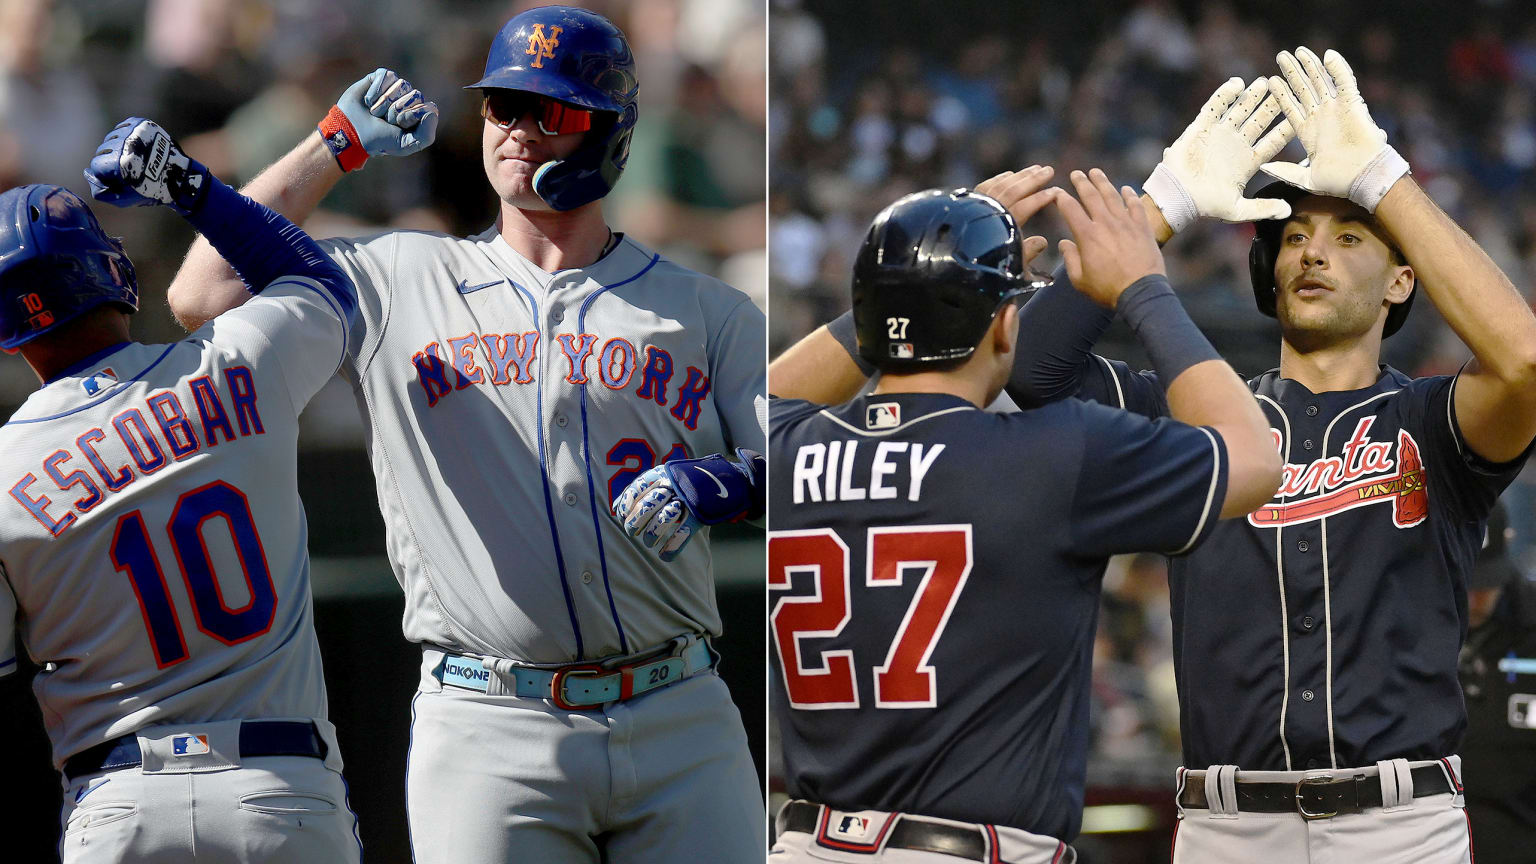 A split image showing two Mets celebrating a home run on the left and two Braves high-fiving on the right